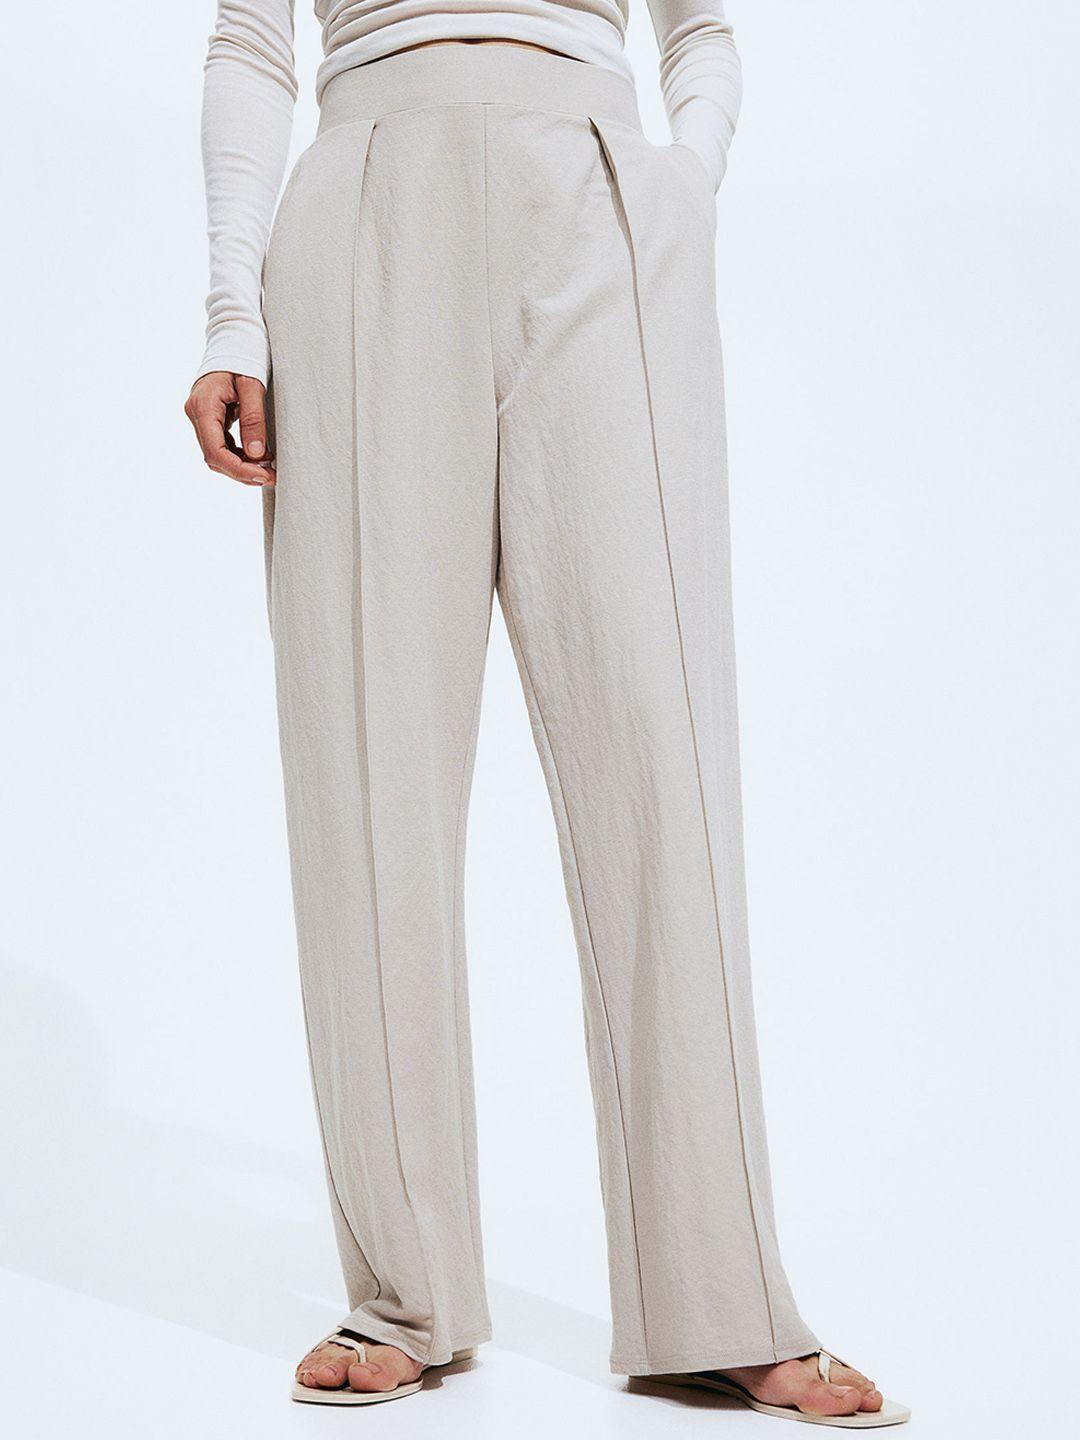 h&m-women-high-waisted-tailored-trousers